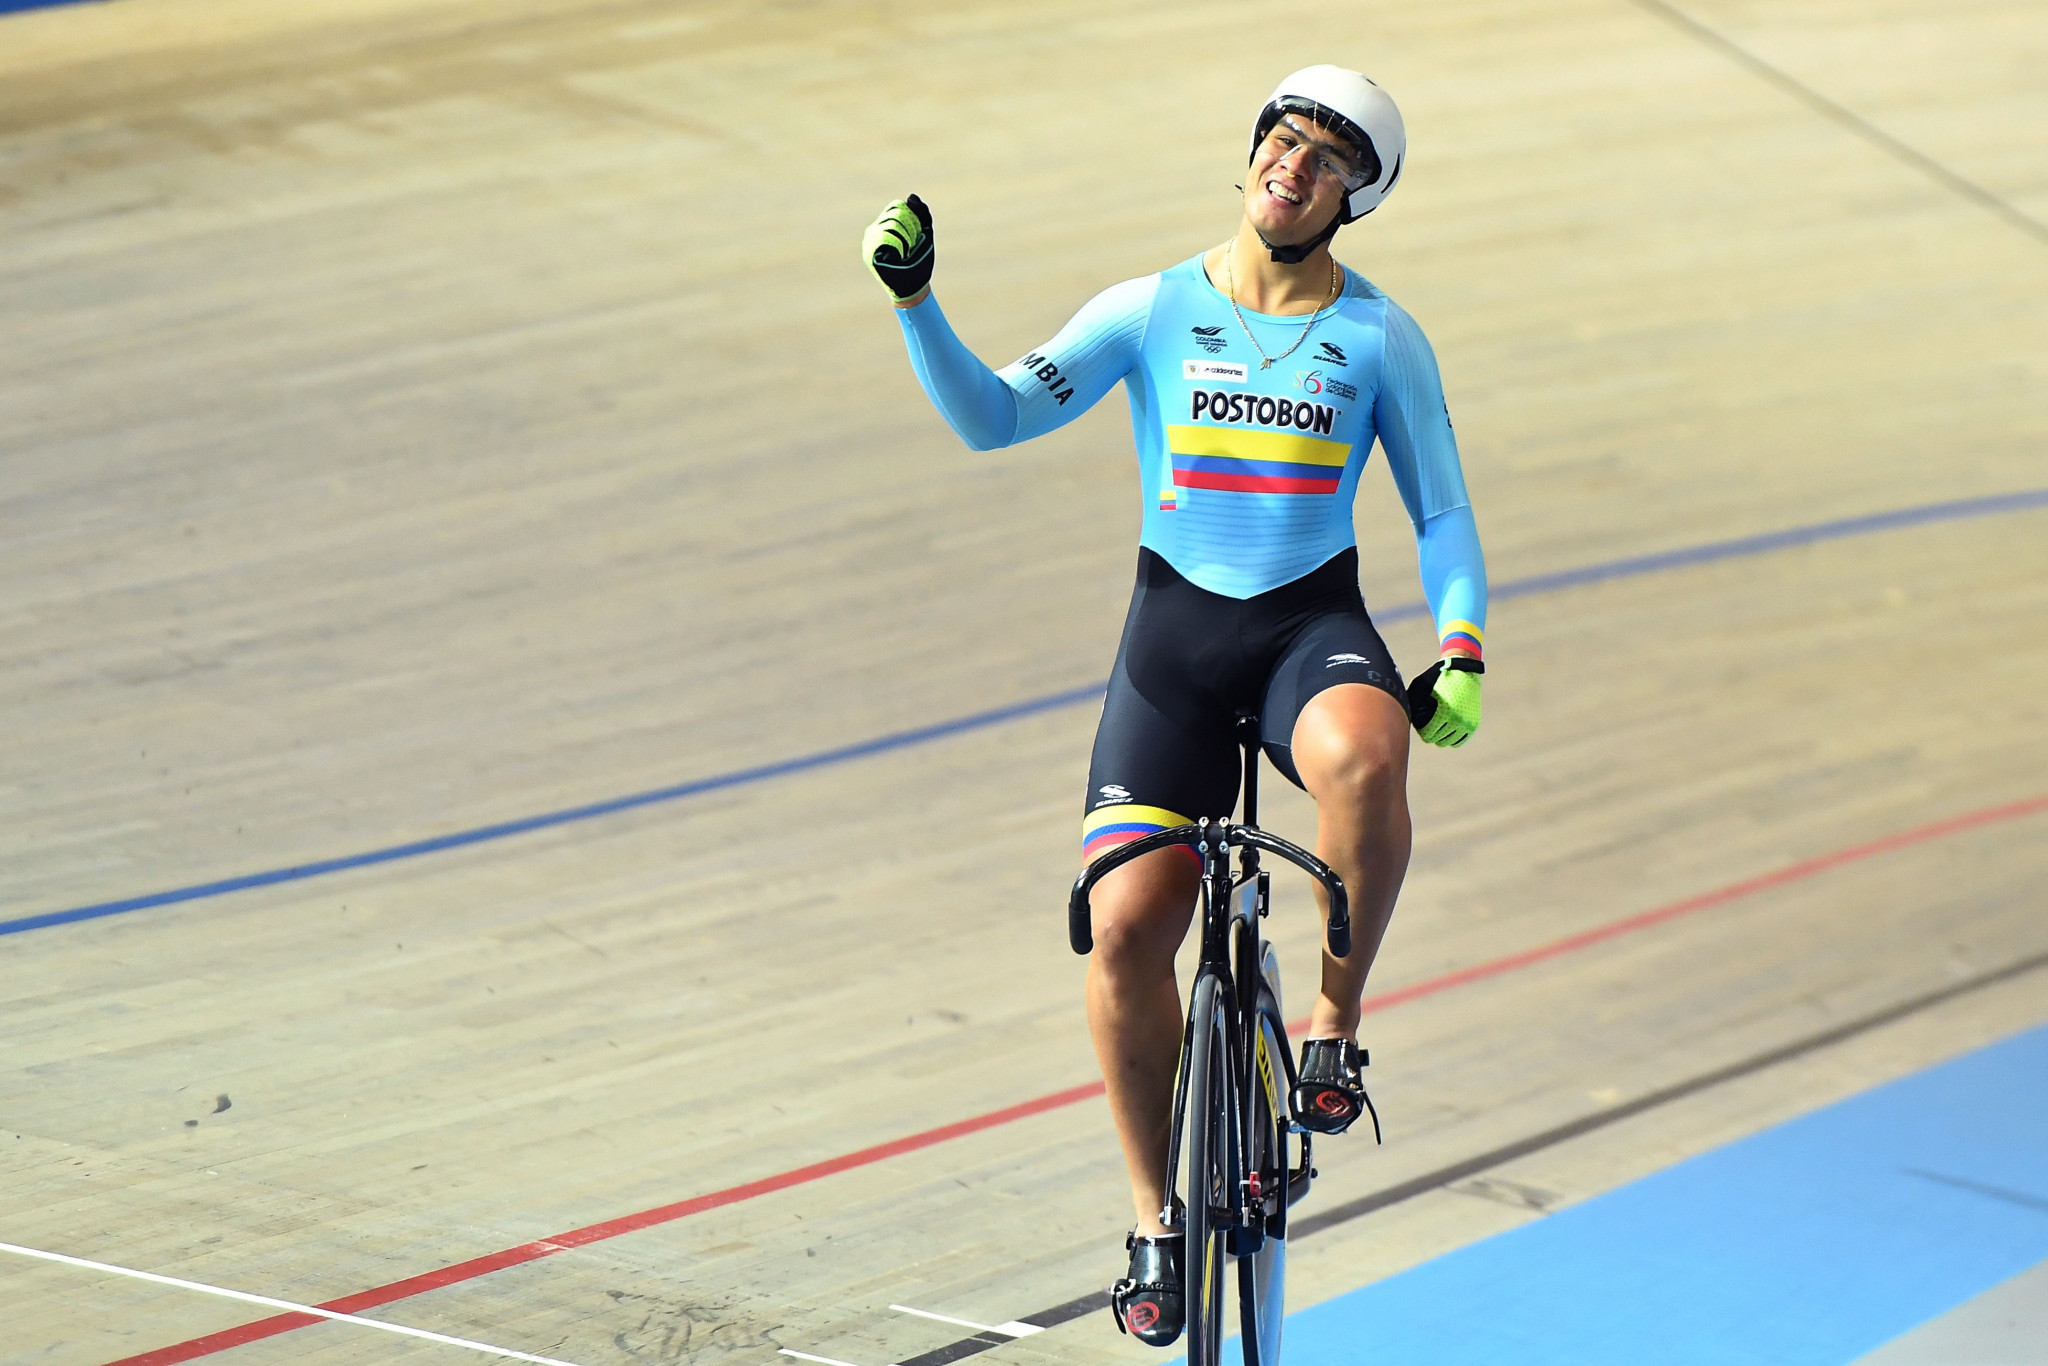 Colombia's world champion Fabian Puerta earned the men's keirin title in front of a home crowd ©Getty Images